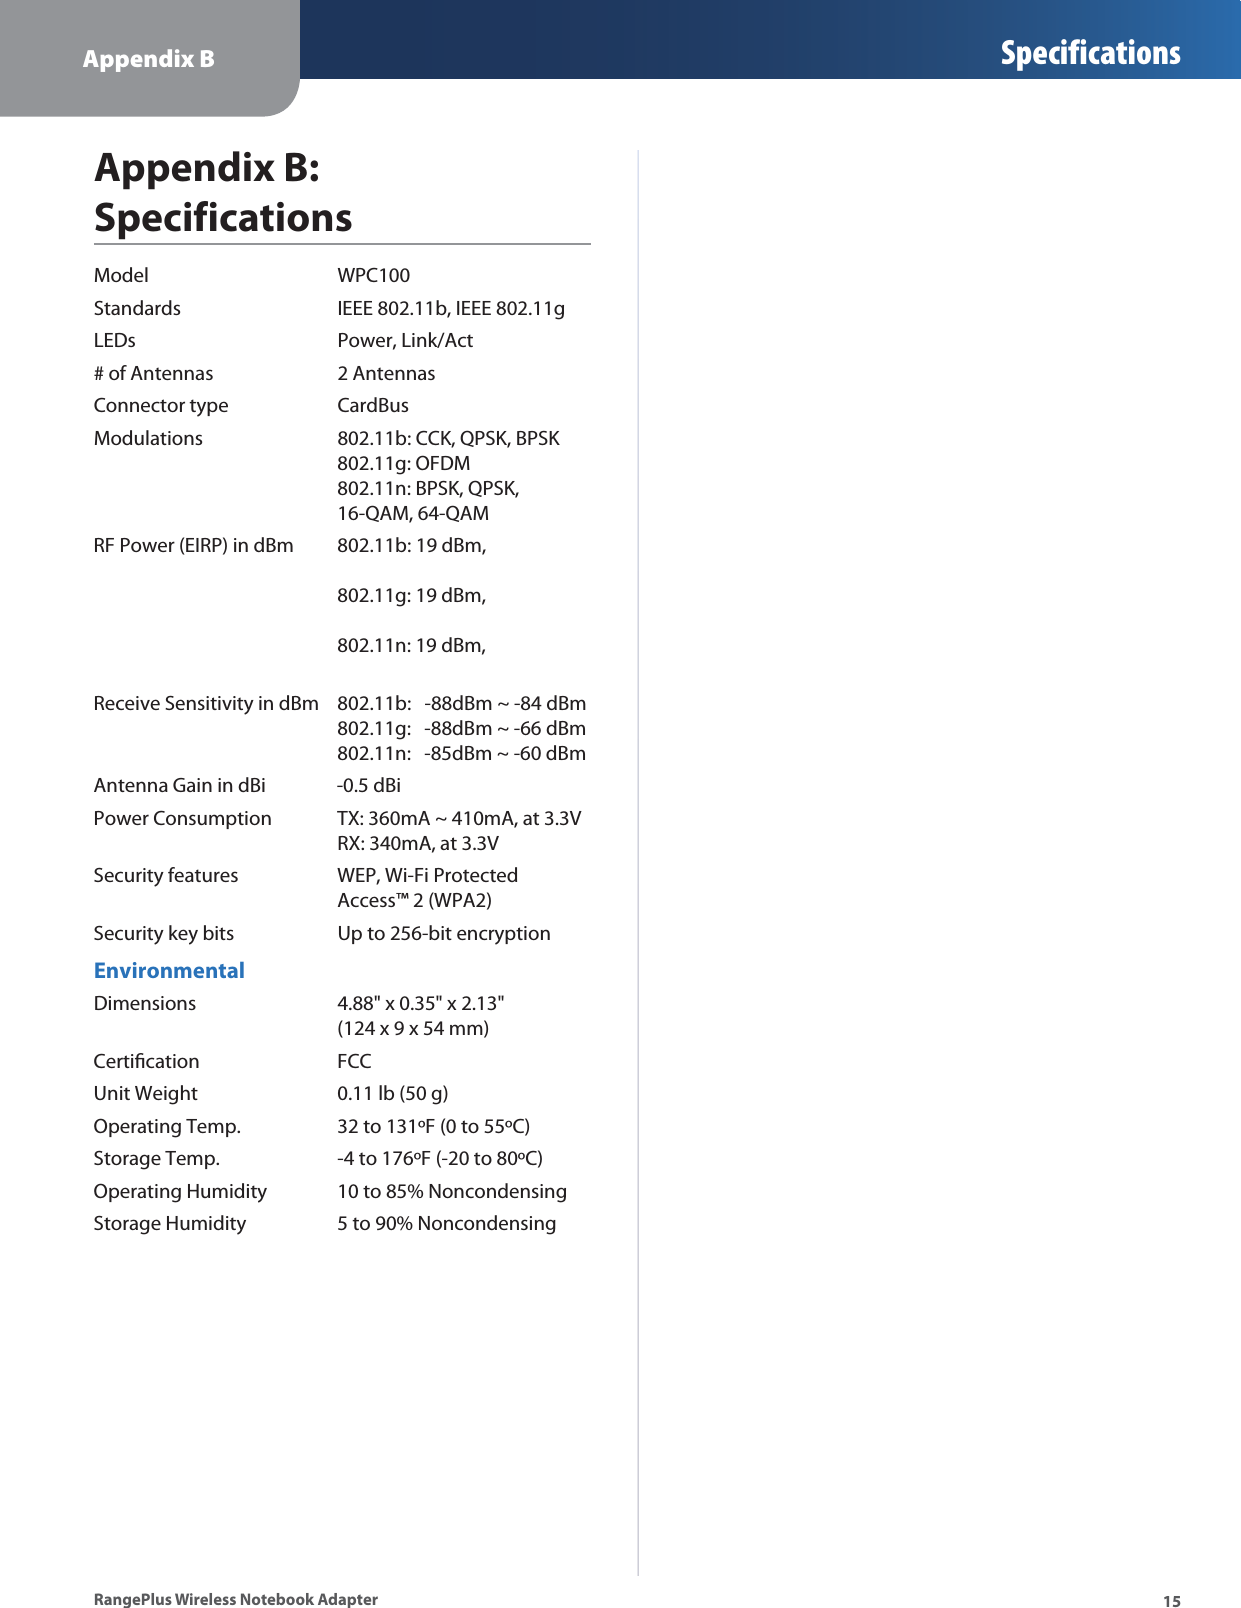 Appendix B Specifications15RangePlus Wireless Notebook AdapterAppendix B: SpecificationsModel WPC100Standards IEEE 802.11b, IEEE 802.11gLEDs Power, Link/Act# of Antennas 2 AntennasConnector type CardBusModulations 802.11b: CCK, QPSK, BPSK802.11g: OFDM802.11n: BPSK, QPSK, 16-QAM, 64-QAMRF Power (EIRP) in dBm 802.11b: 19 dBm,802.11g: 19 dBm,802.11n: 19 dBm,Receive Sensitivity in dBm 802.11b:   -88dBm ~ -84 dBm802.11g:   -88dBm ~ -66 dBm802.11n:   -85dBm ~ -60 dBmAntenna Gain in dBi                -0.5 dBiPower Consumption TX: 360mA ~ 410mA, at 3.3VRX: 340mA, at 3.3VSecurity features WEP, Wi-Fi Protected Access™ 2 (WPA2)Security key bits Up to 256-bit encryptionEnvironmentalDimensions 4.88&quot; x 0.35&quot; x 2.13&quot; (124 x 9 x 54 mm)Certiﬁcation FCCUnit Weight 0.11 lb (50 g)Operating Temp. 32 to 131ºF (0 to 55ºC)Storage Temp. -4 to 176ºF (-20 to 80ºC)Operating Humidity 10 to 85% NoncondensingStorage Humidity 5 to 90% Noncondensing